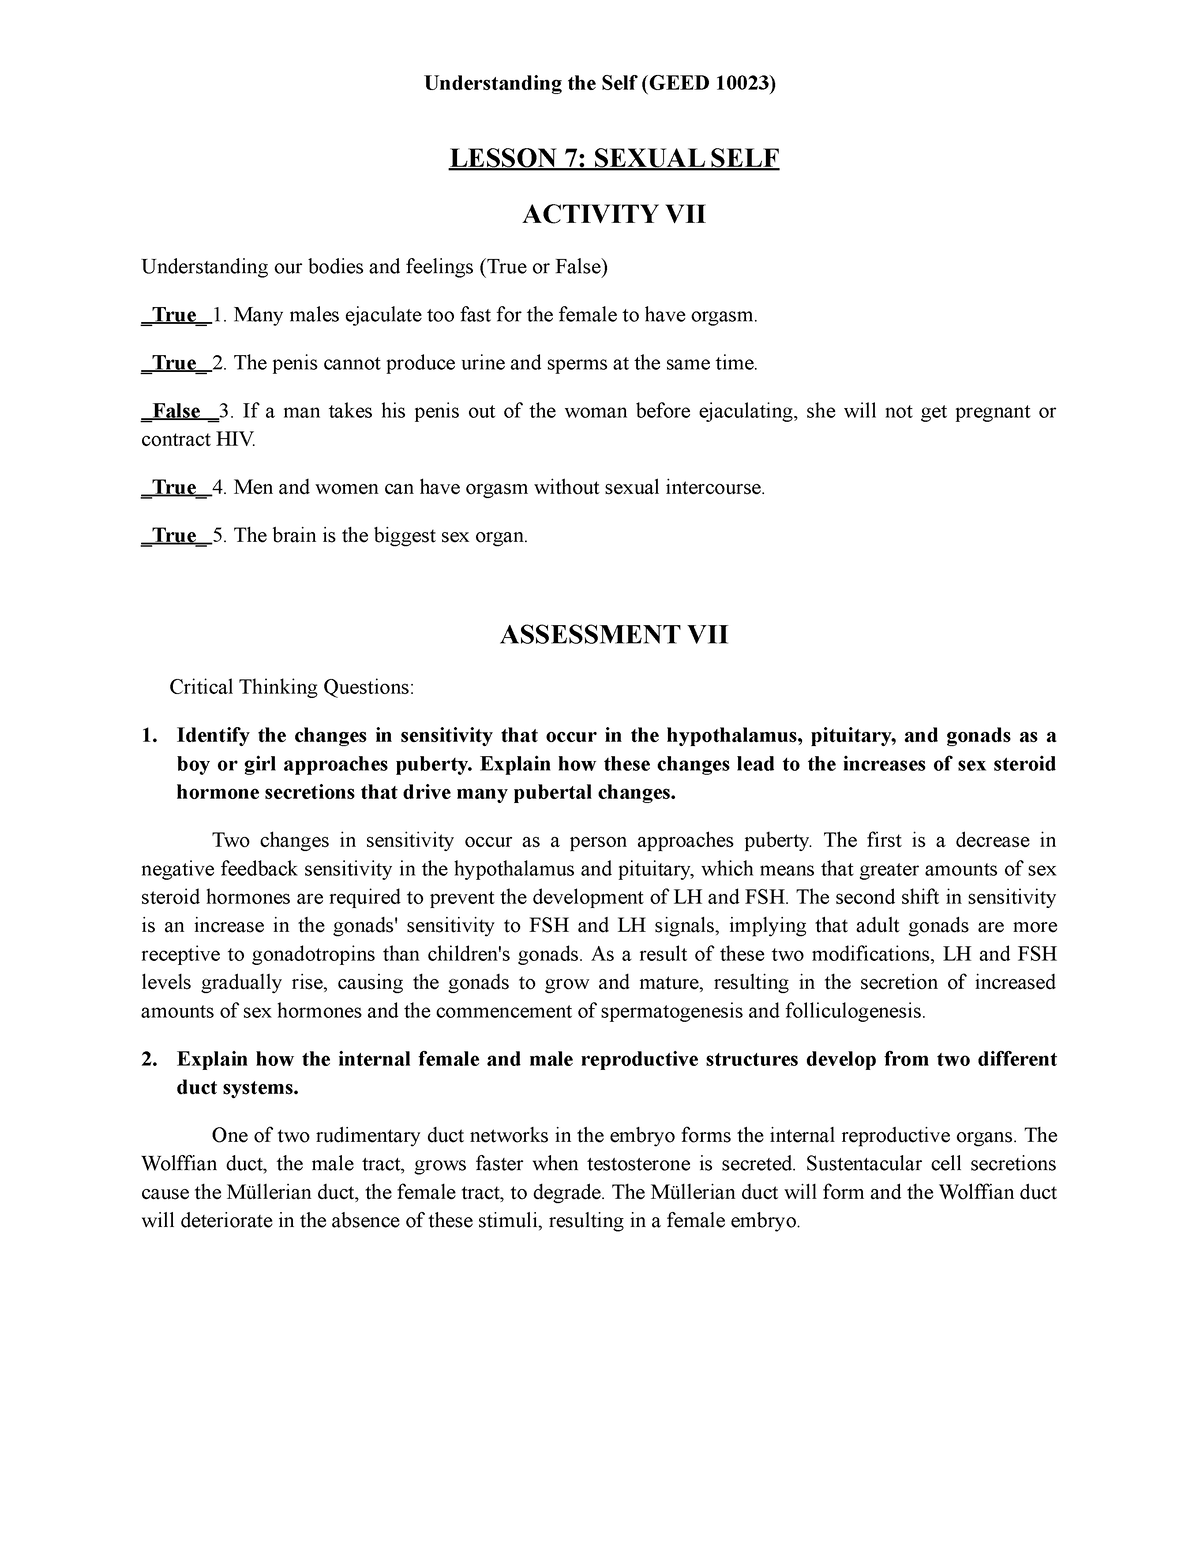 Understanding The Self Uts Activity Lesson 7 Understanding The Self Geed 10023 Lesson 7 0648